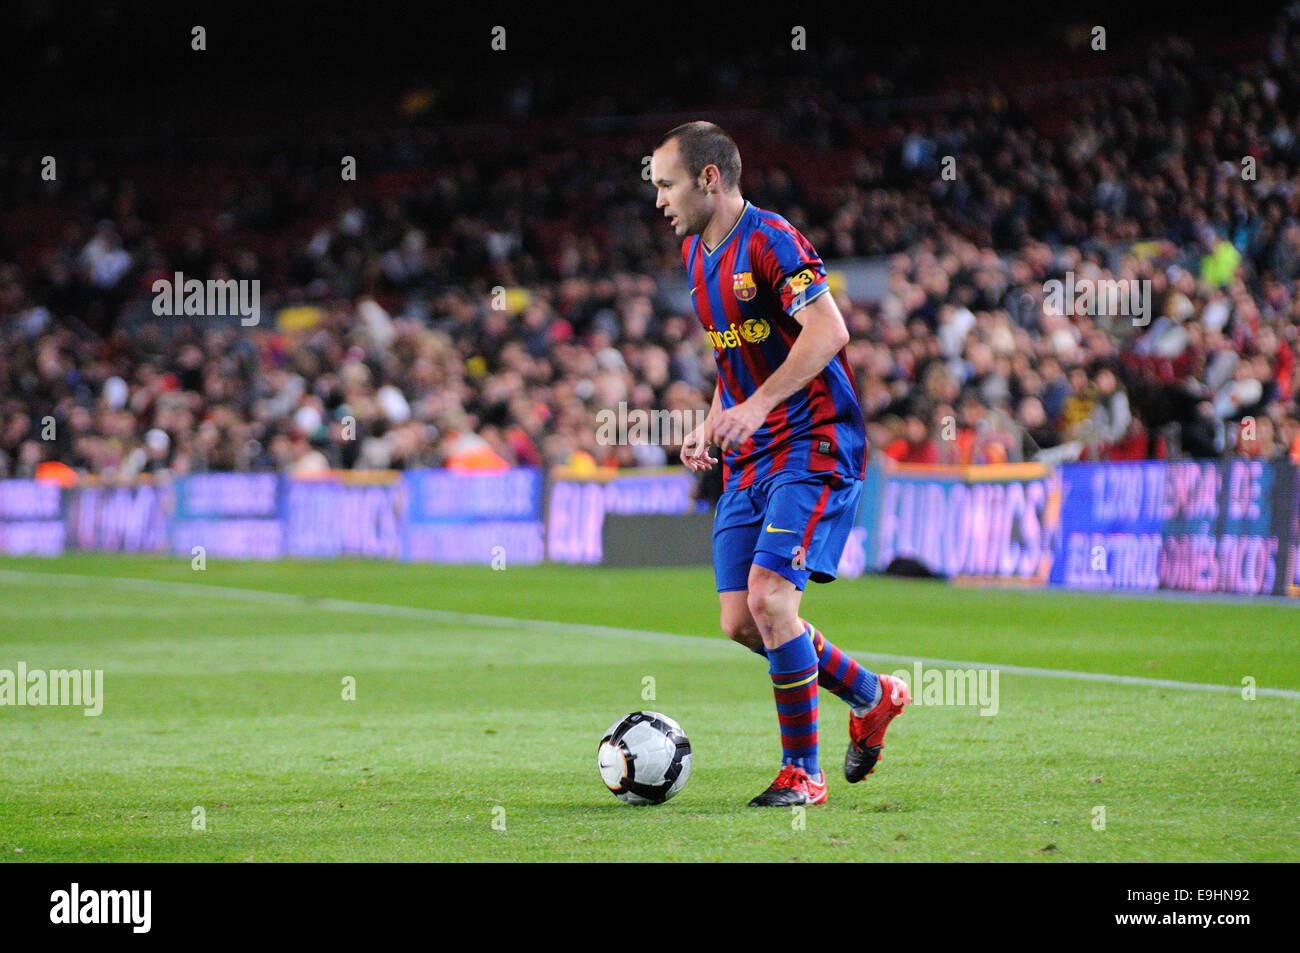 BARCELONA - NOV 10: Andres Iniesta, F.C Barcelona player, plays against Cultural Leonesa at the Camp Nou Stadium. Stock Photo